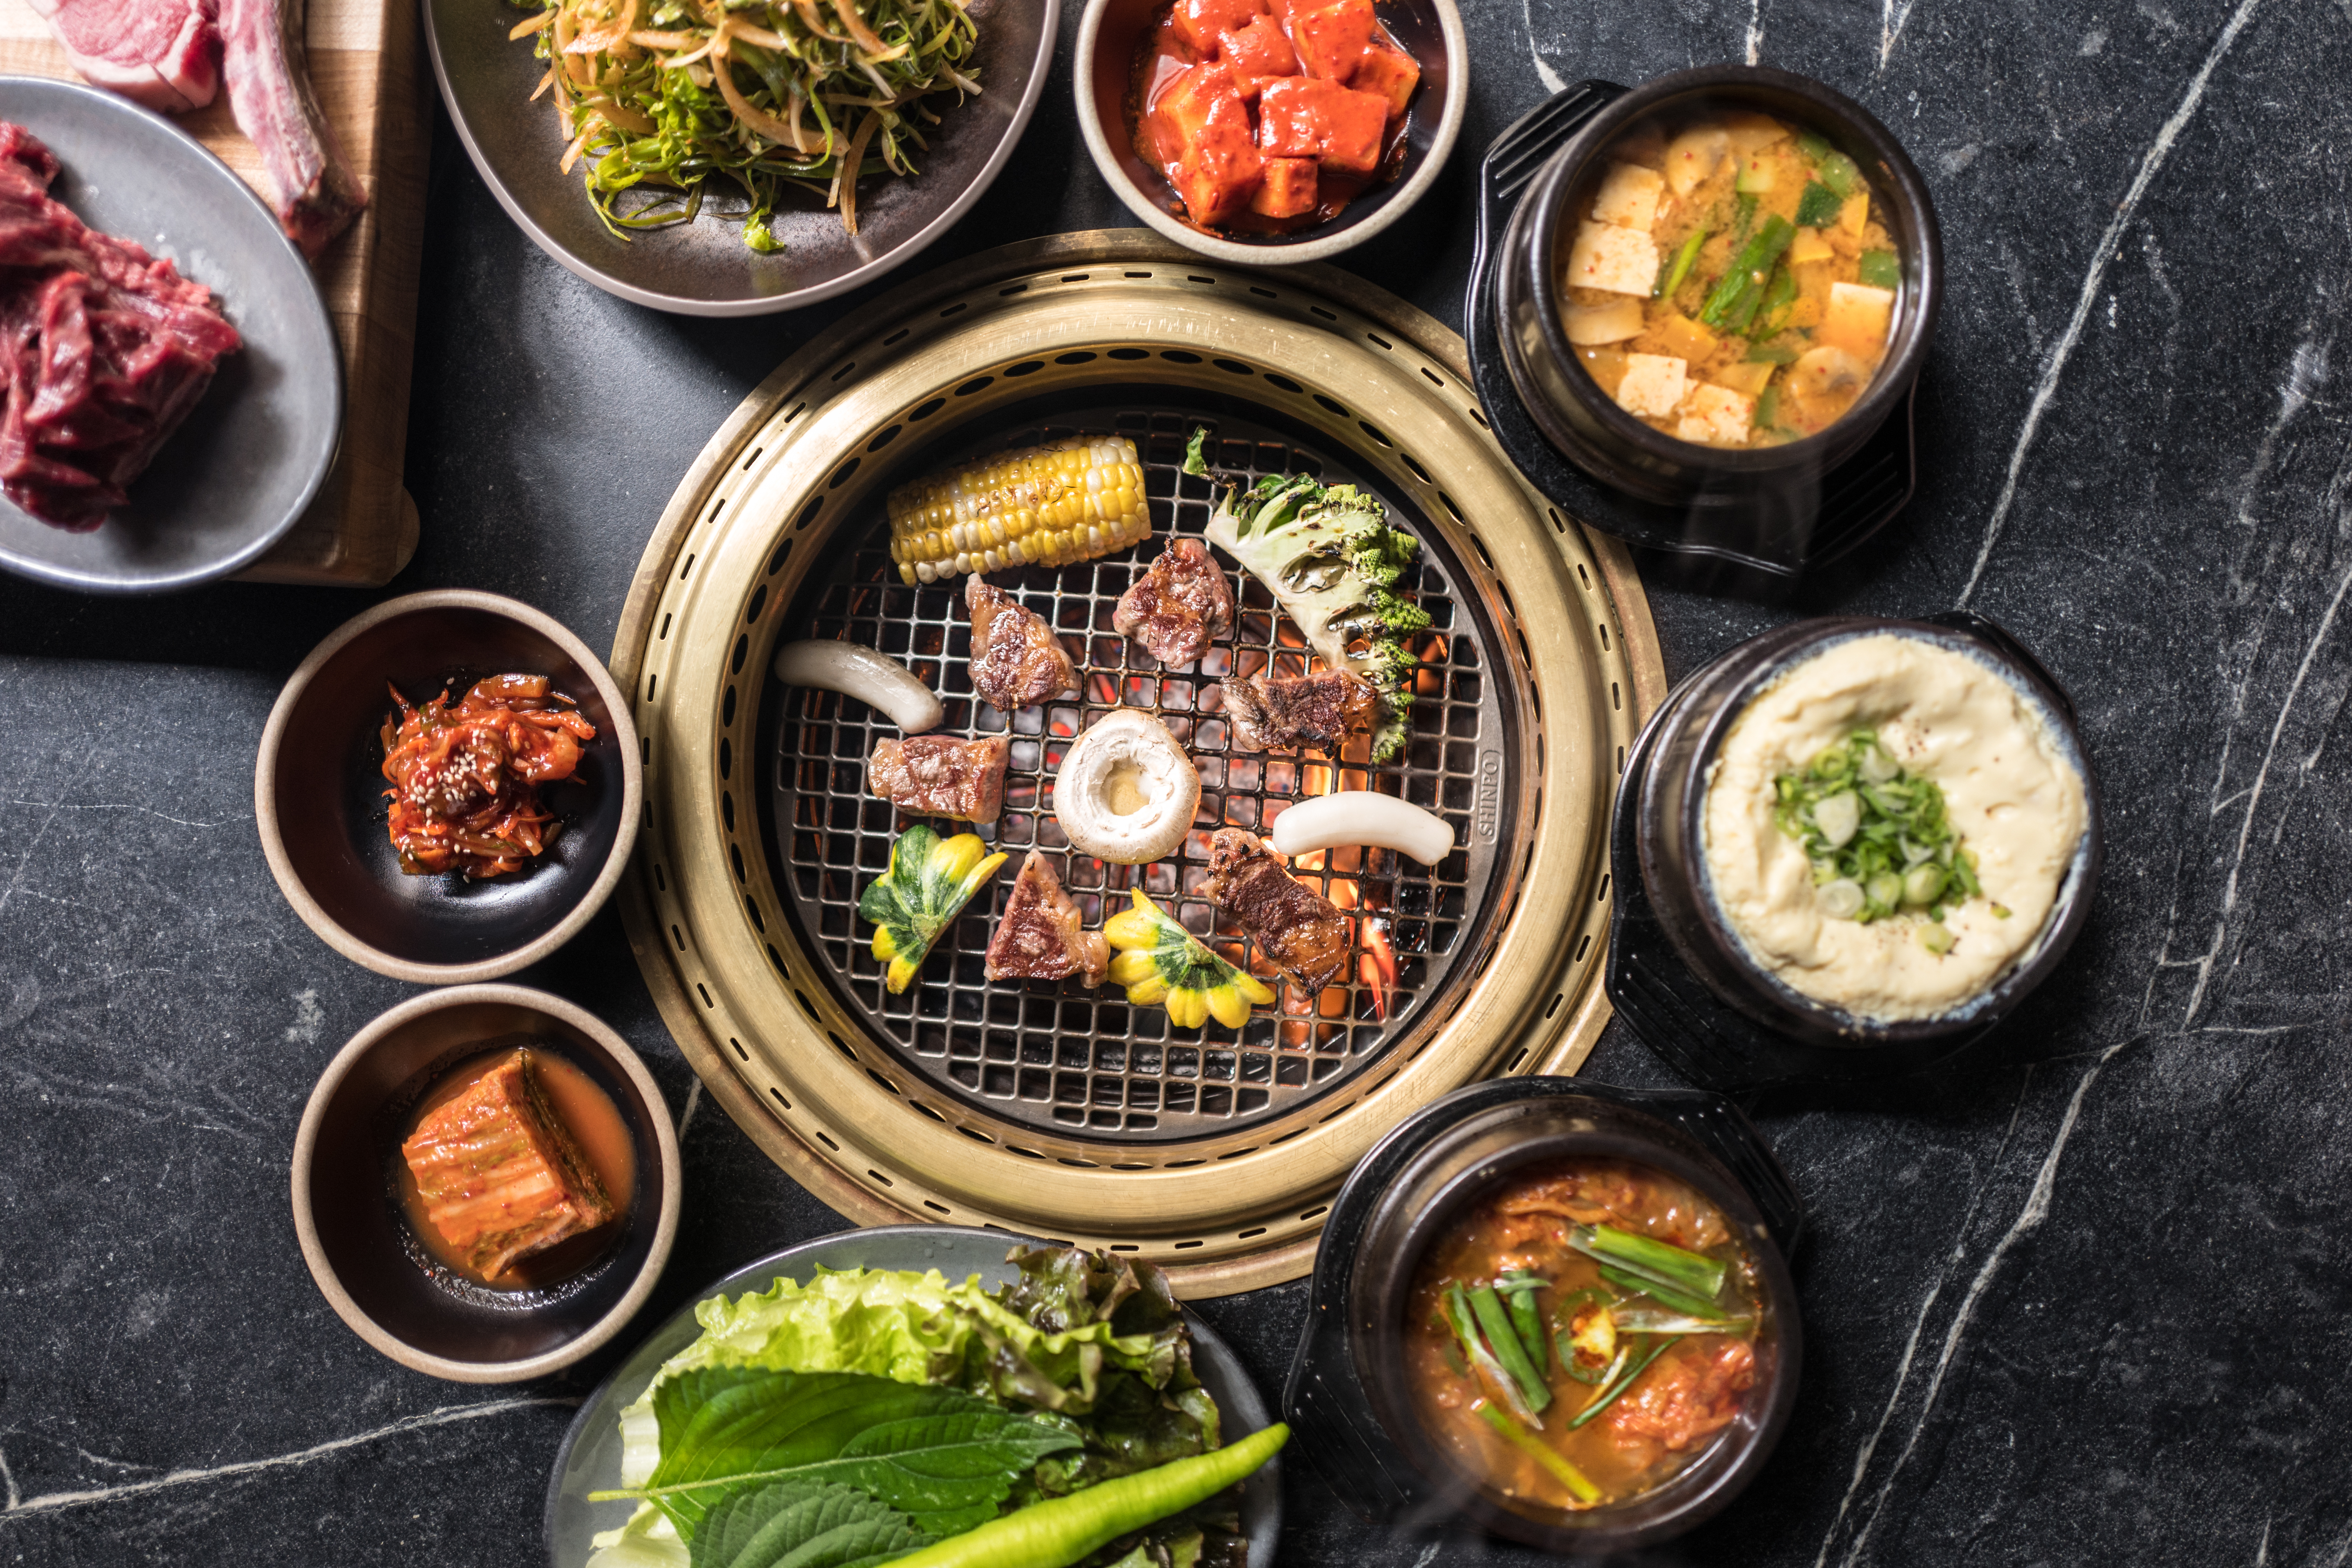 A circular beef-filled tabletop grill sits at the center; around that gold-rimmed grill are small banchan, including kimchi and egg omelet